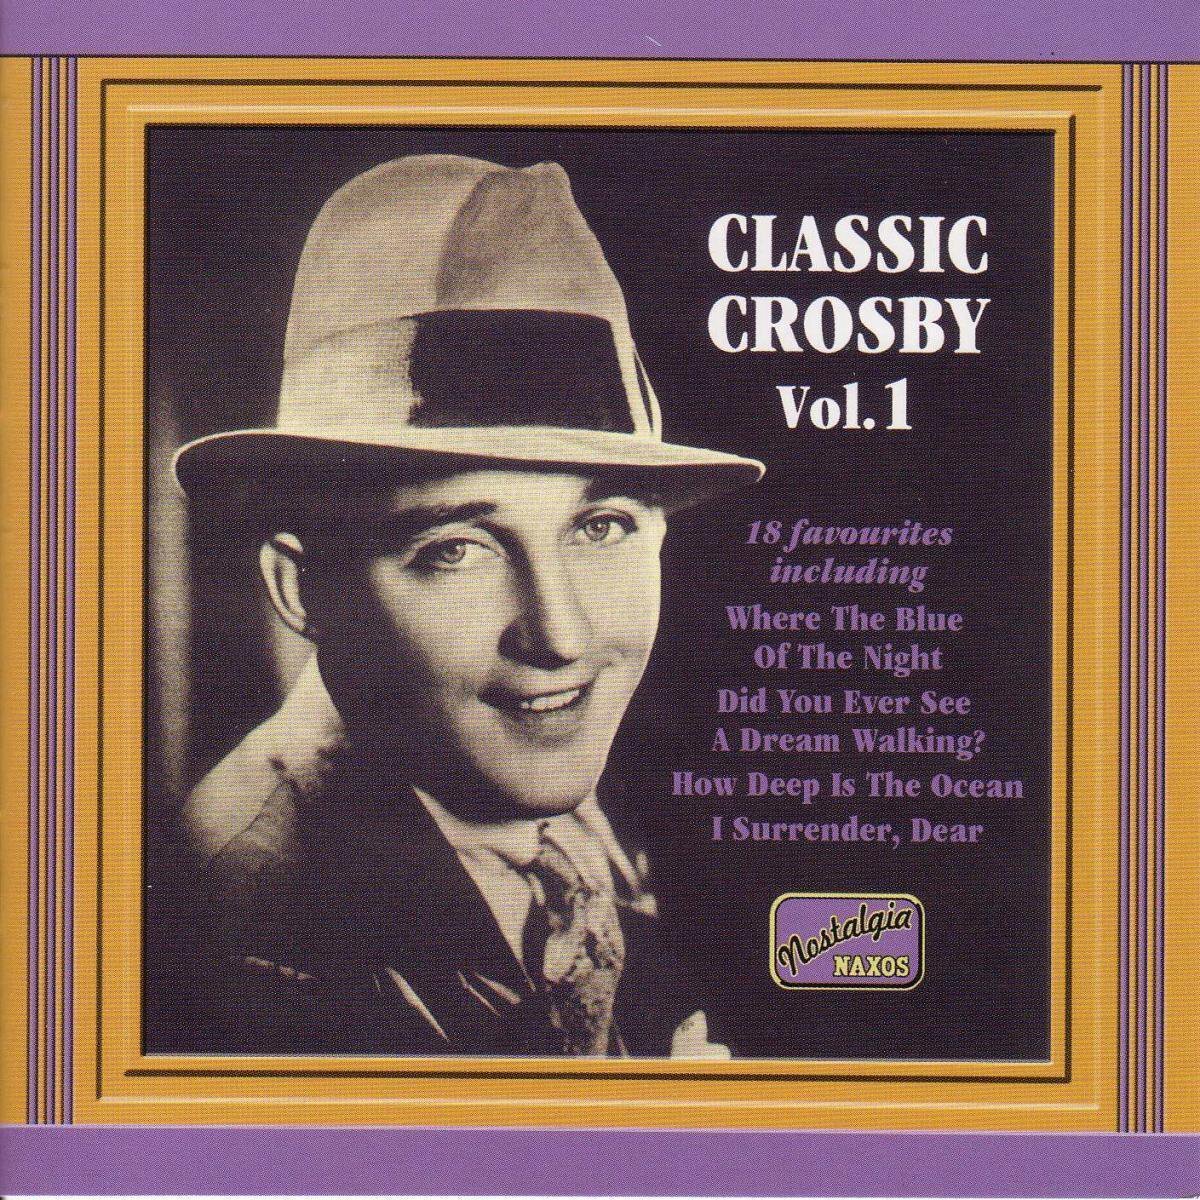 OUTHERE Crosby Bing: Classical Crosby Vol 1